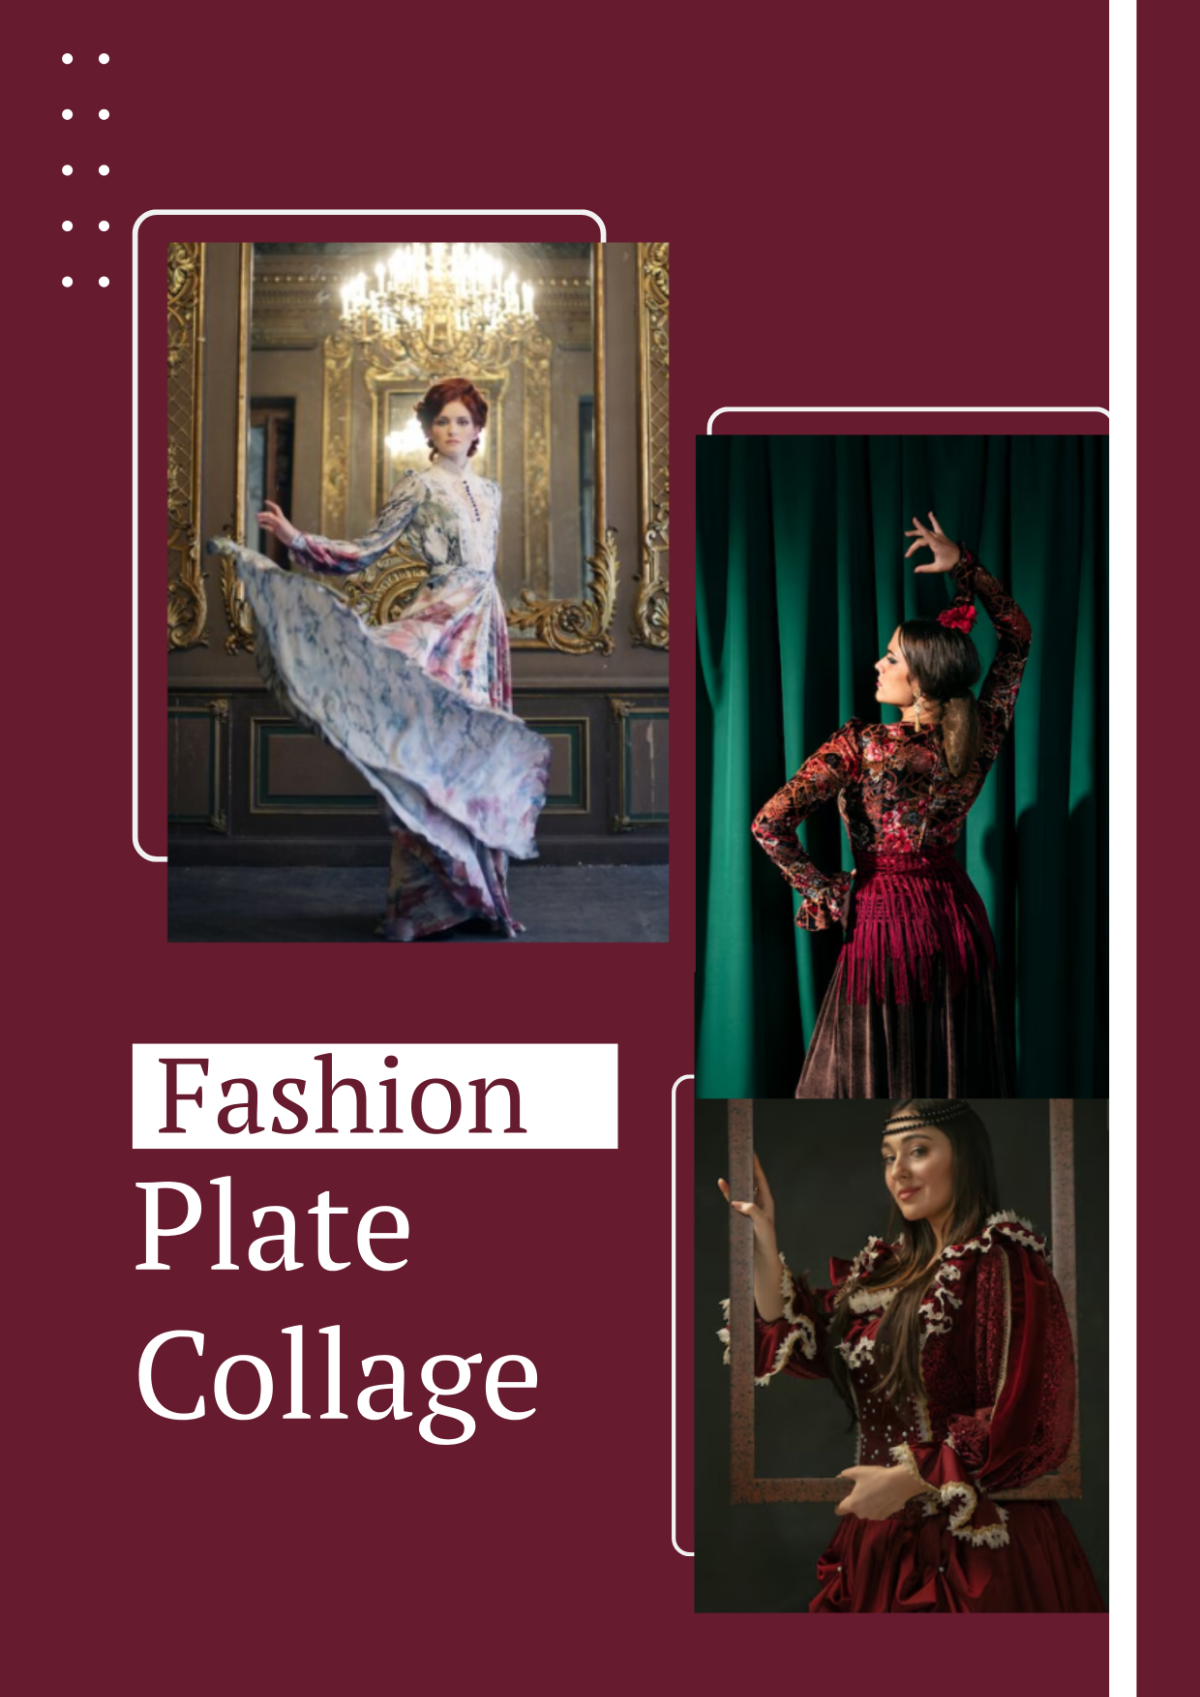 Free Fashion Plate Collage Template